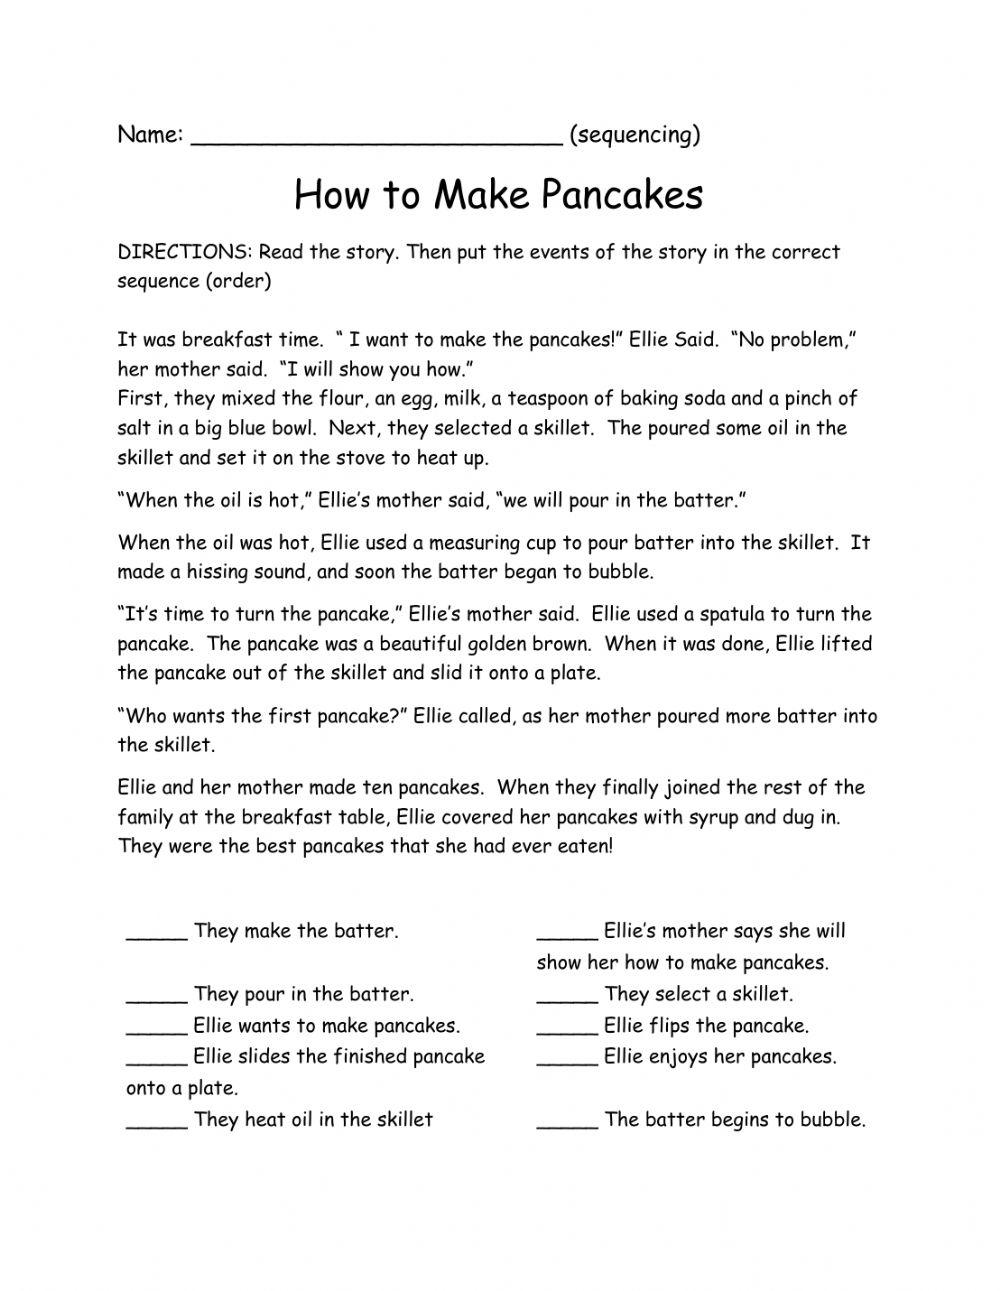 ELA2-Tuesday (Sequencing-How to Make Pancakes)